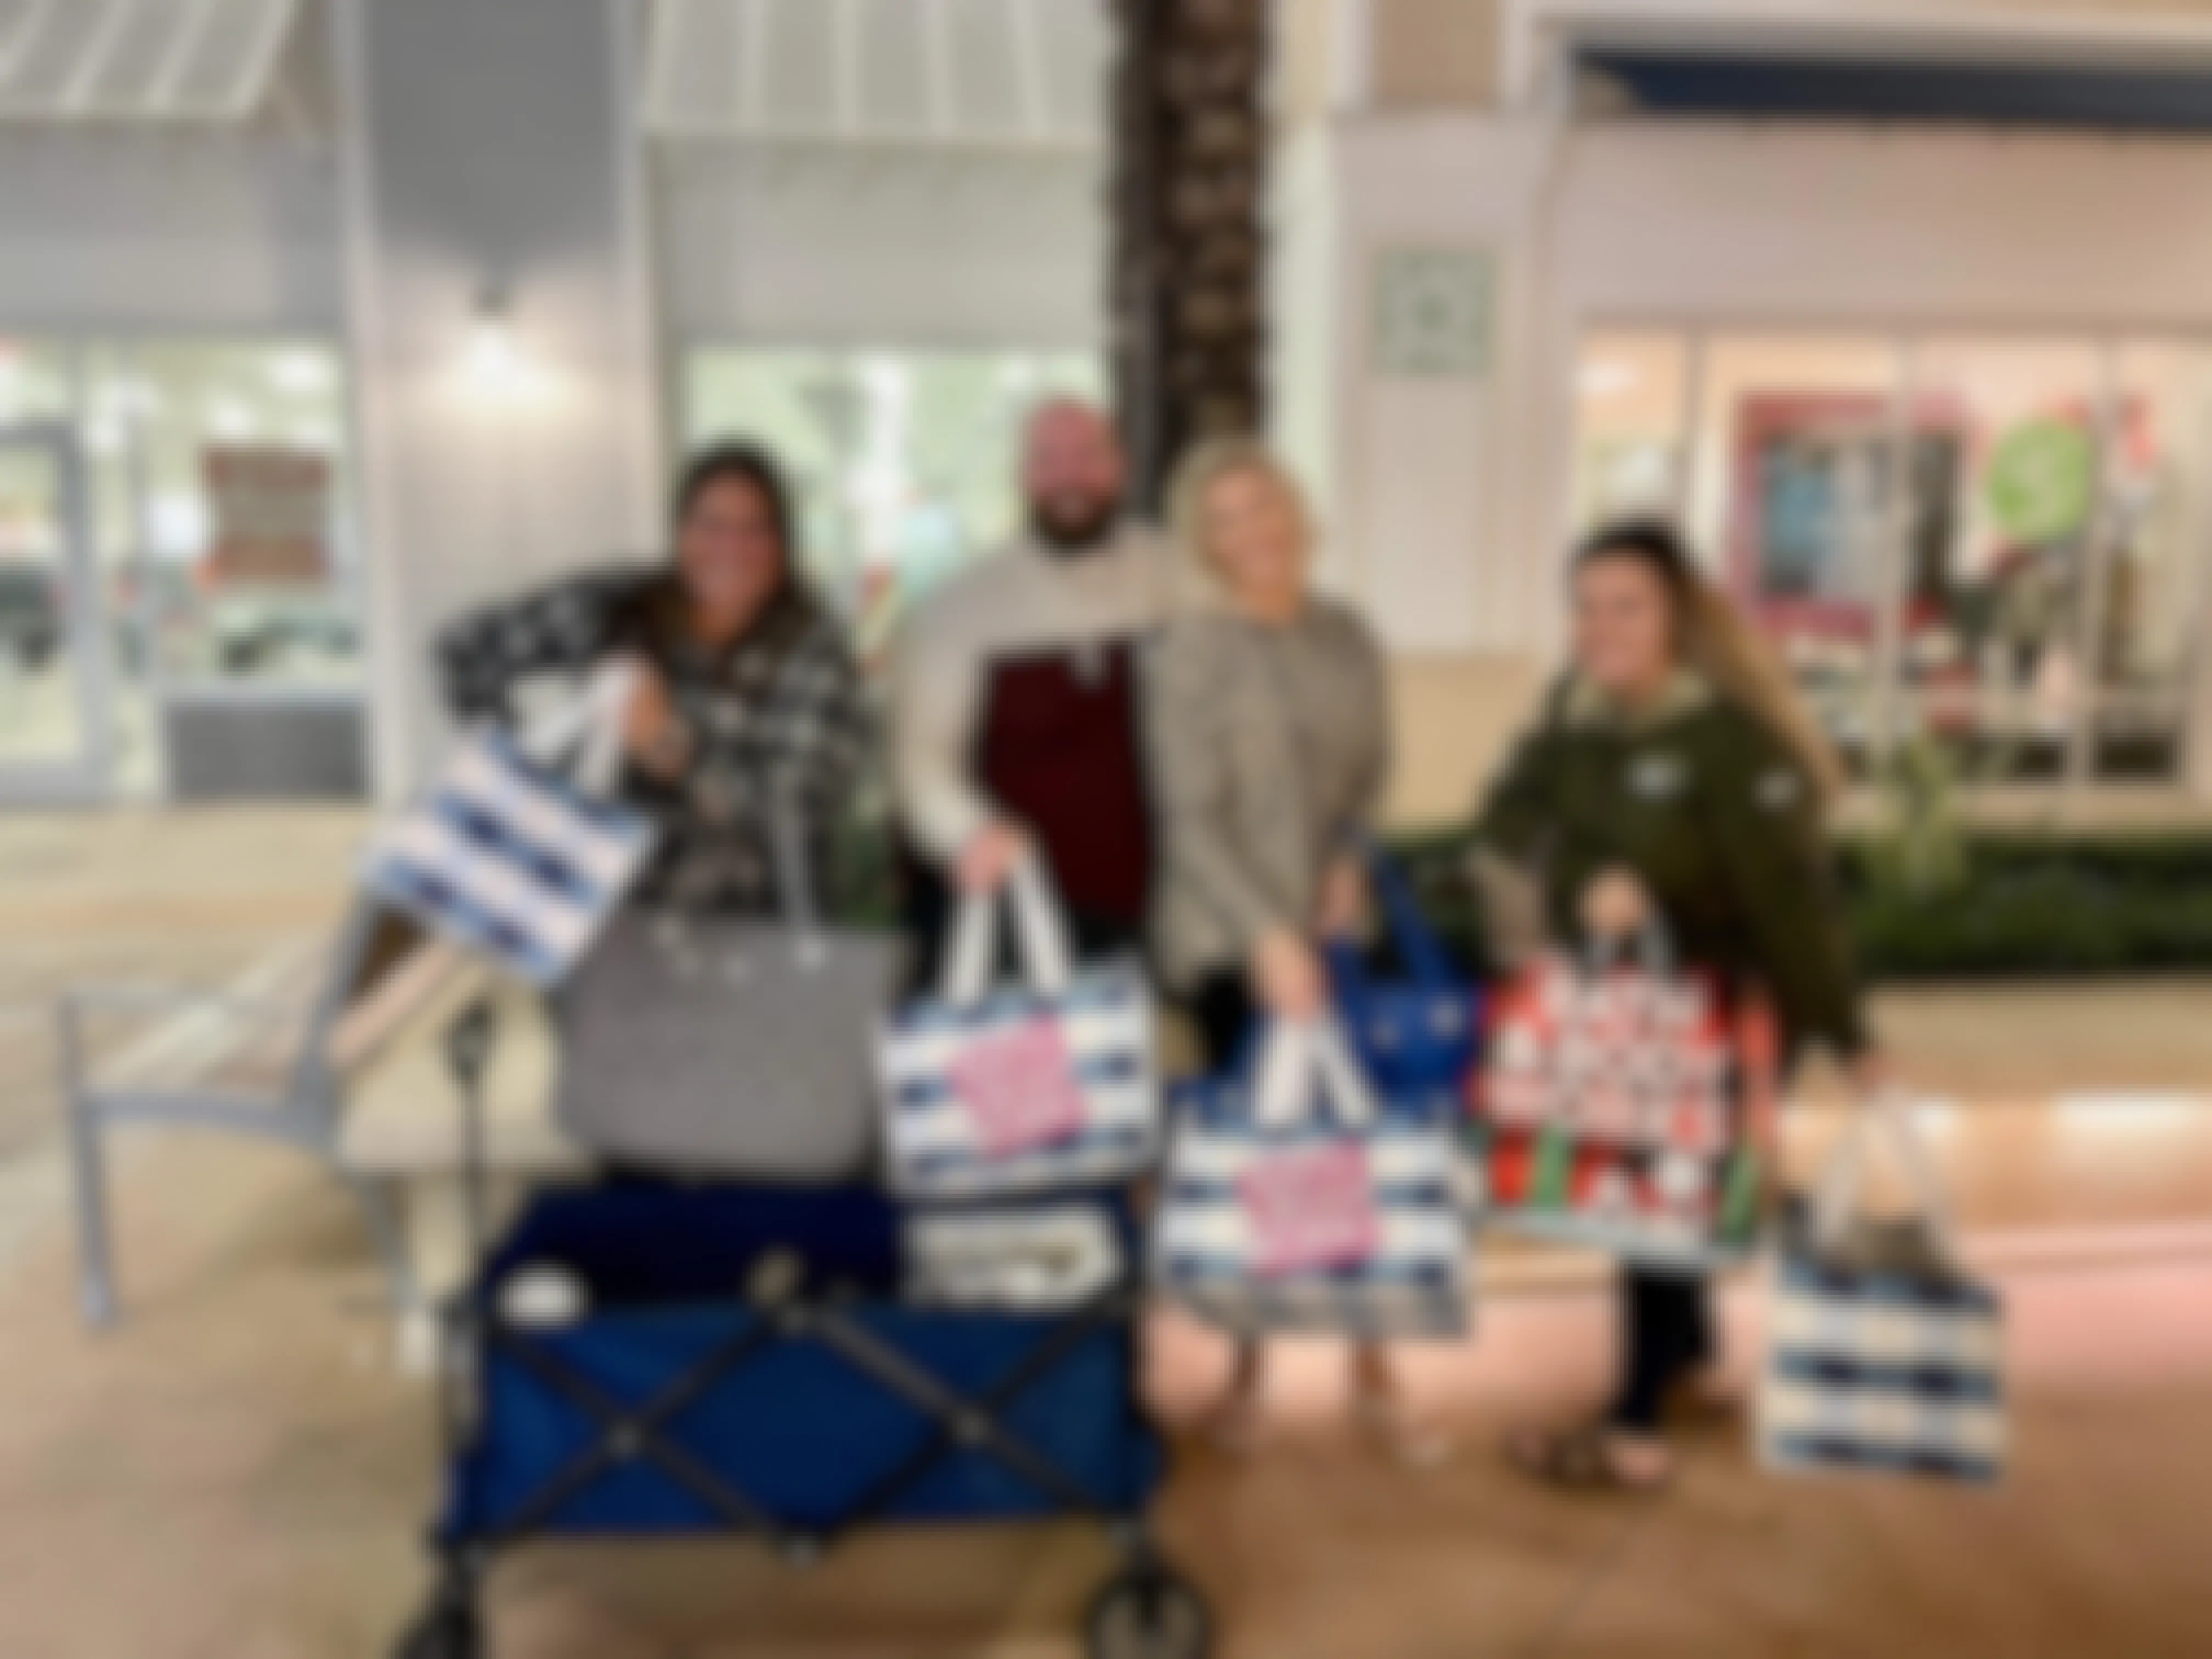 4 people holding bags filled with Bath and Body Works candles. 